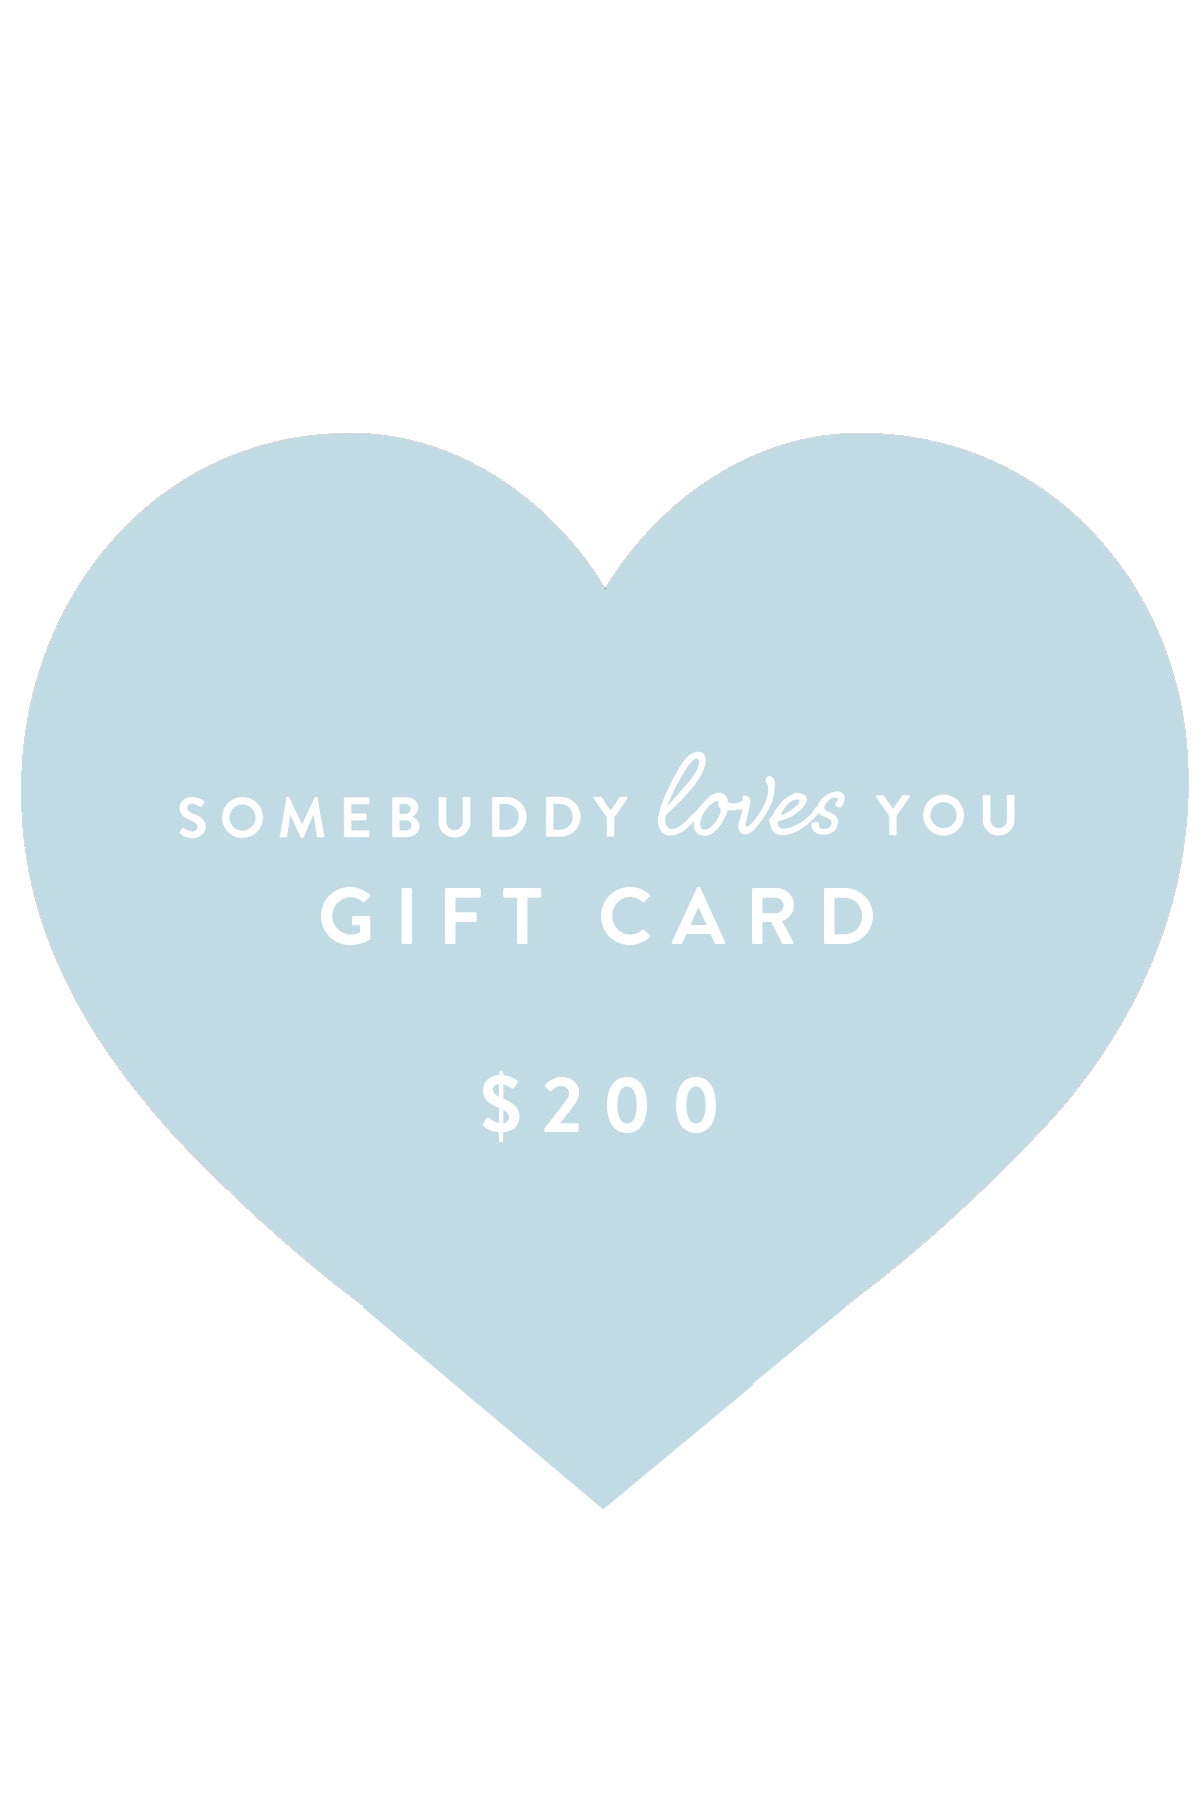 Somebuddy Loves You Gift Card $200